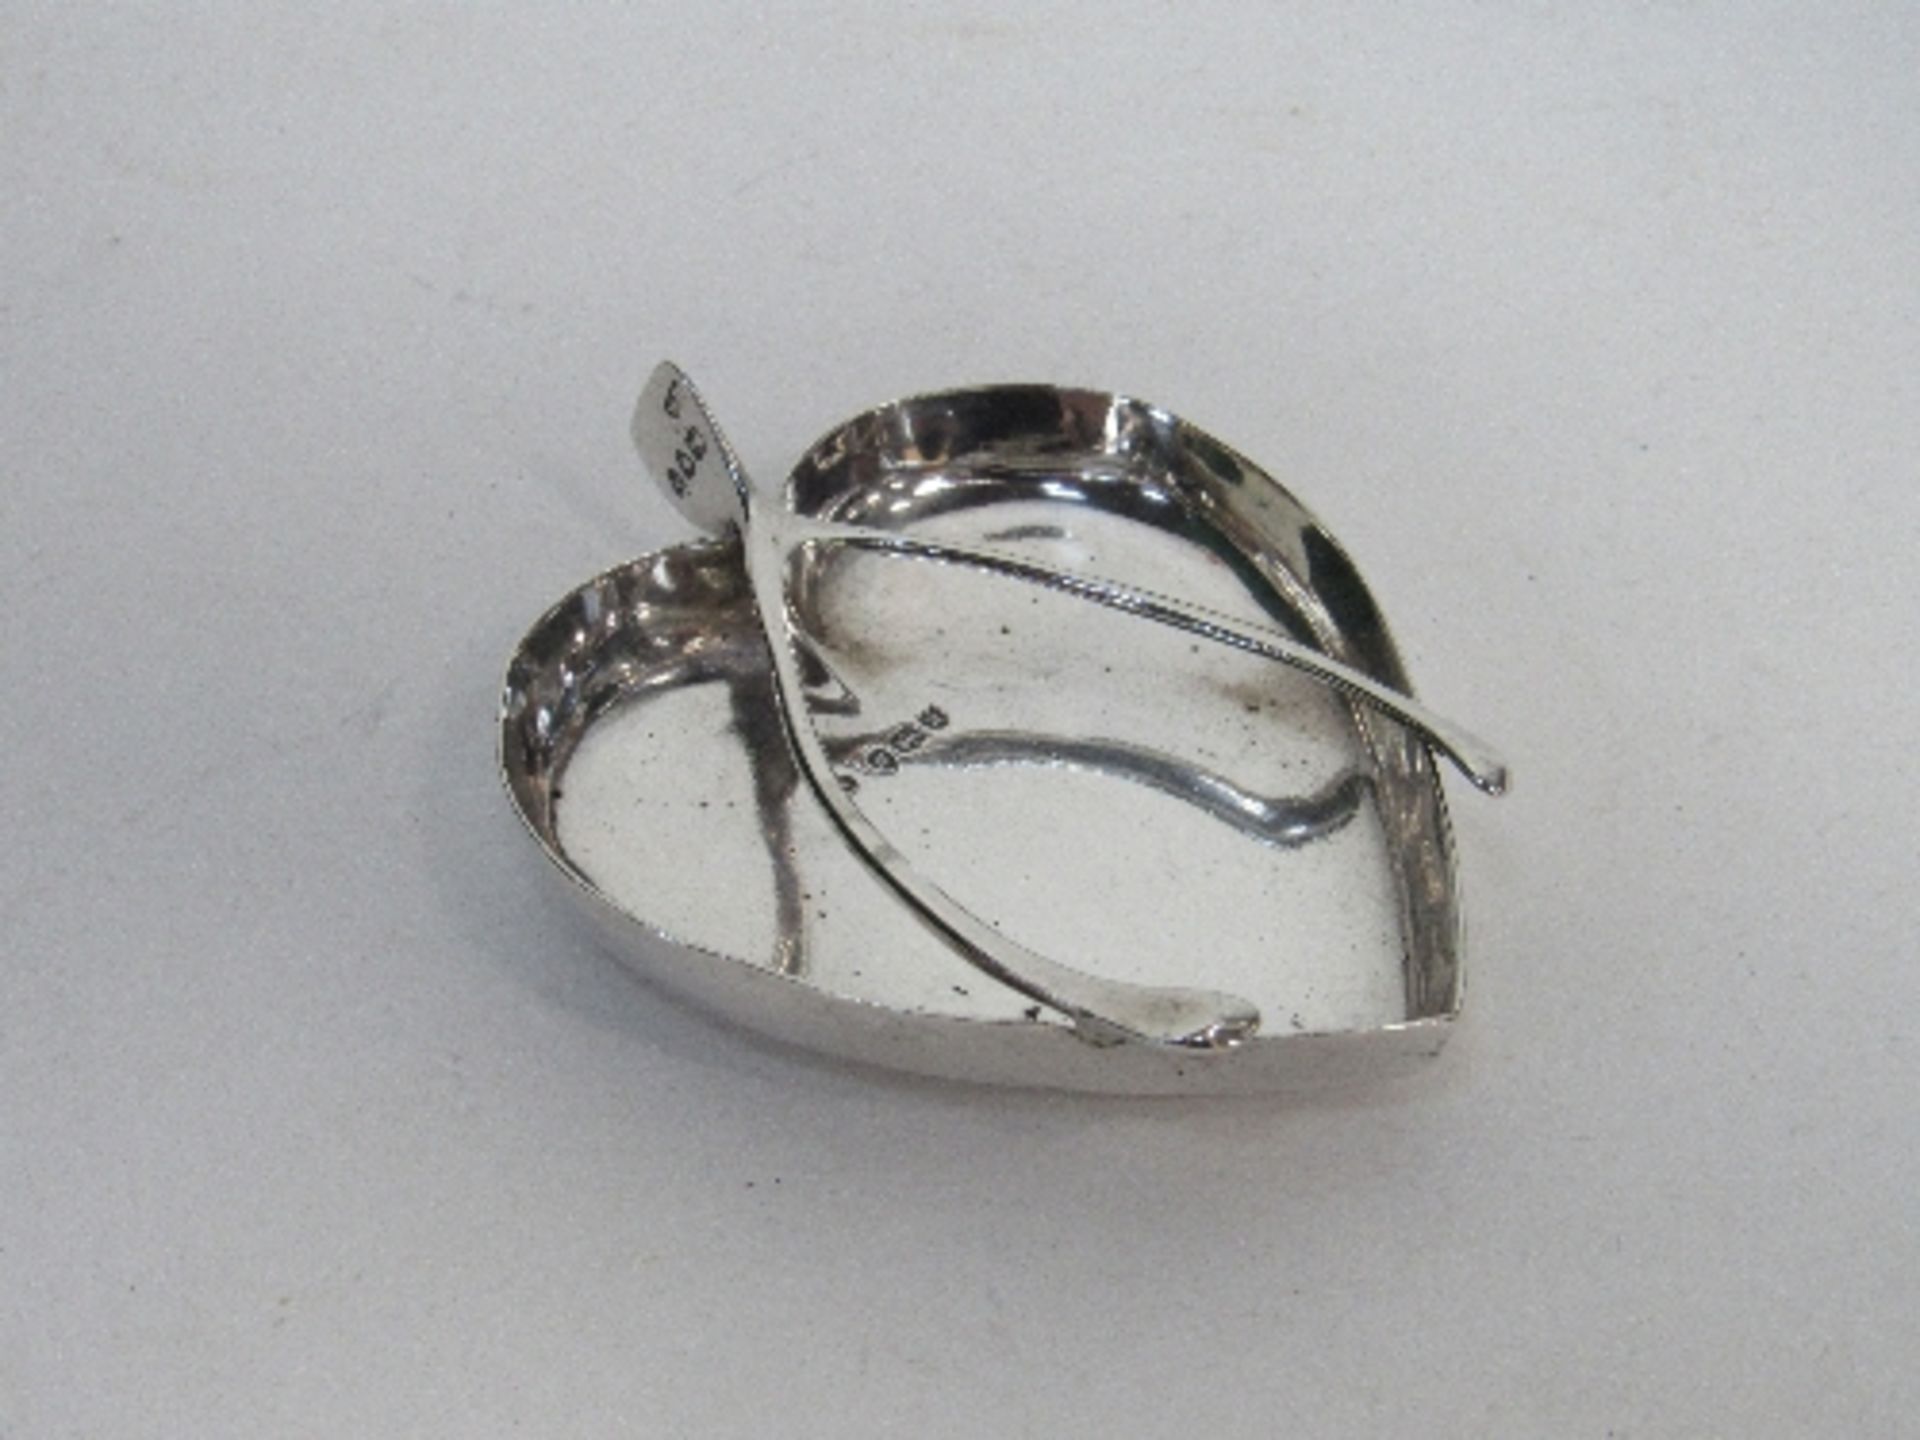 Sterling silver heart shaped dish with wishbone, London 1892, wt - 1.55 troy oz. Price guide £25- - Image 2 of 2